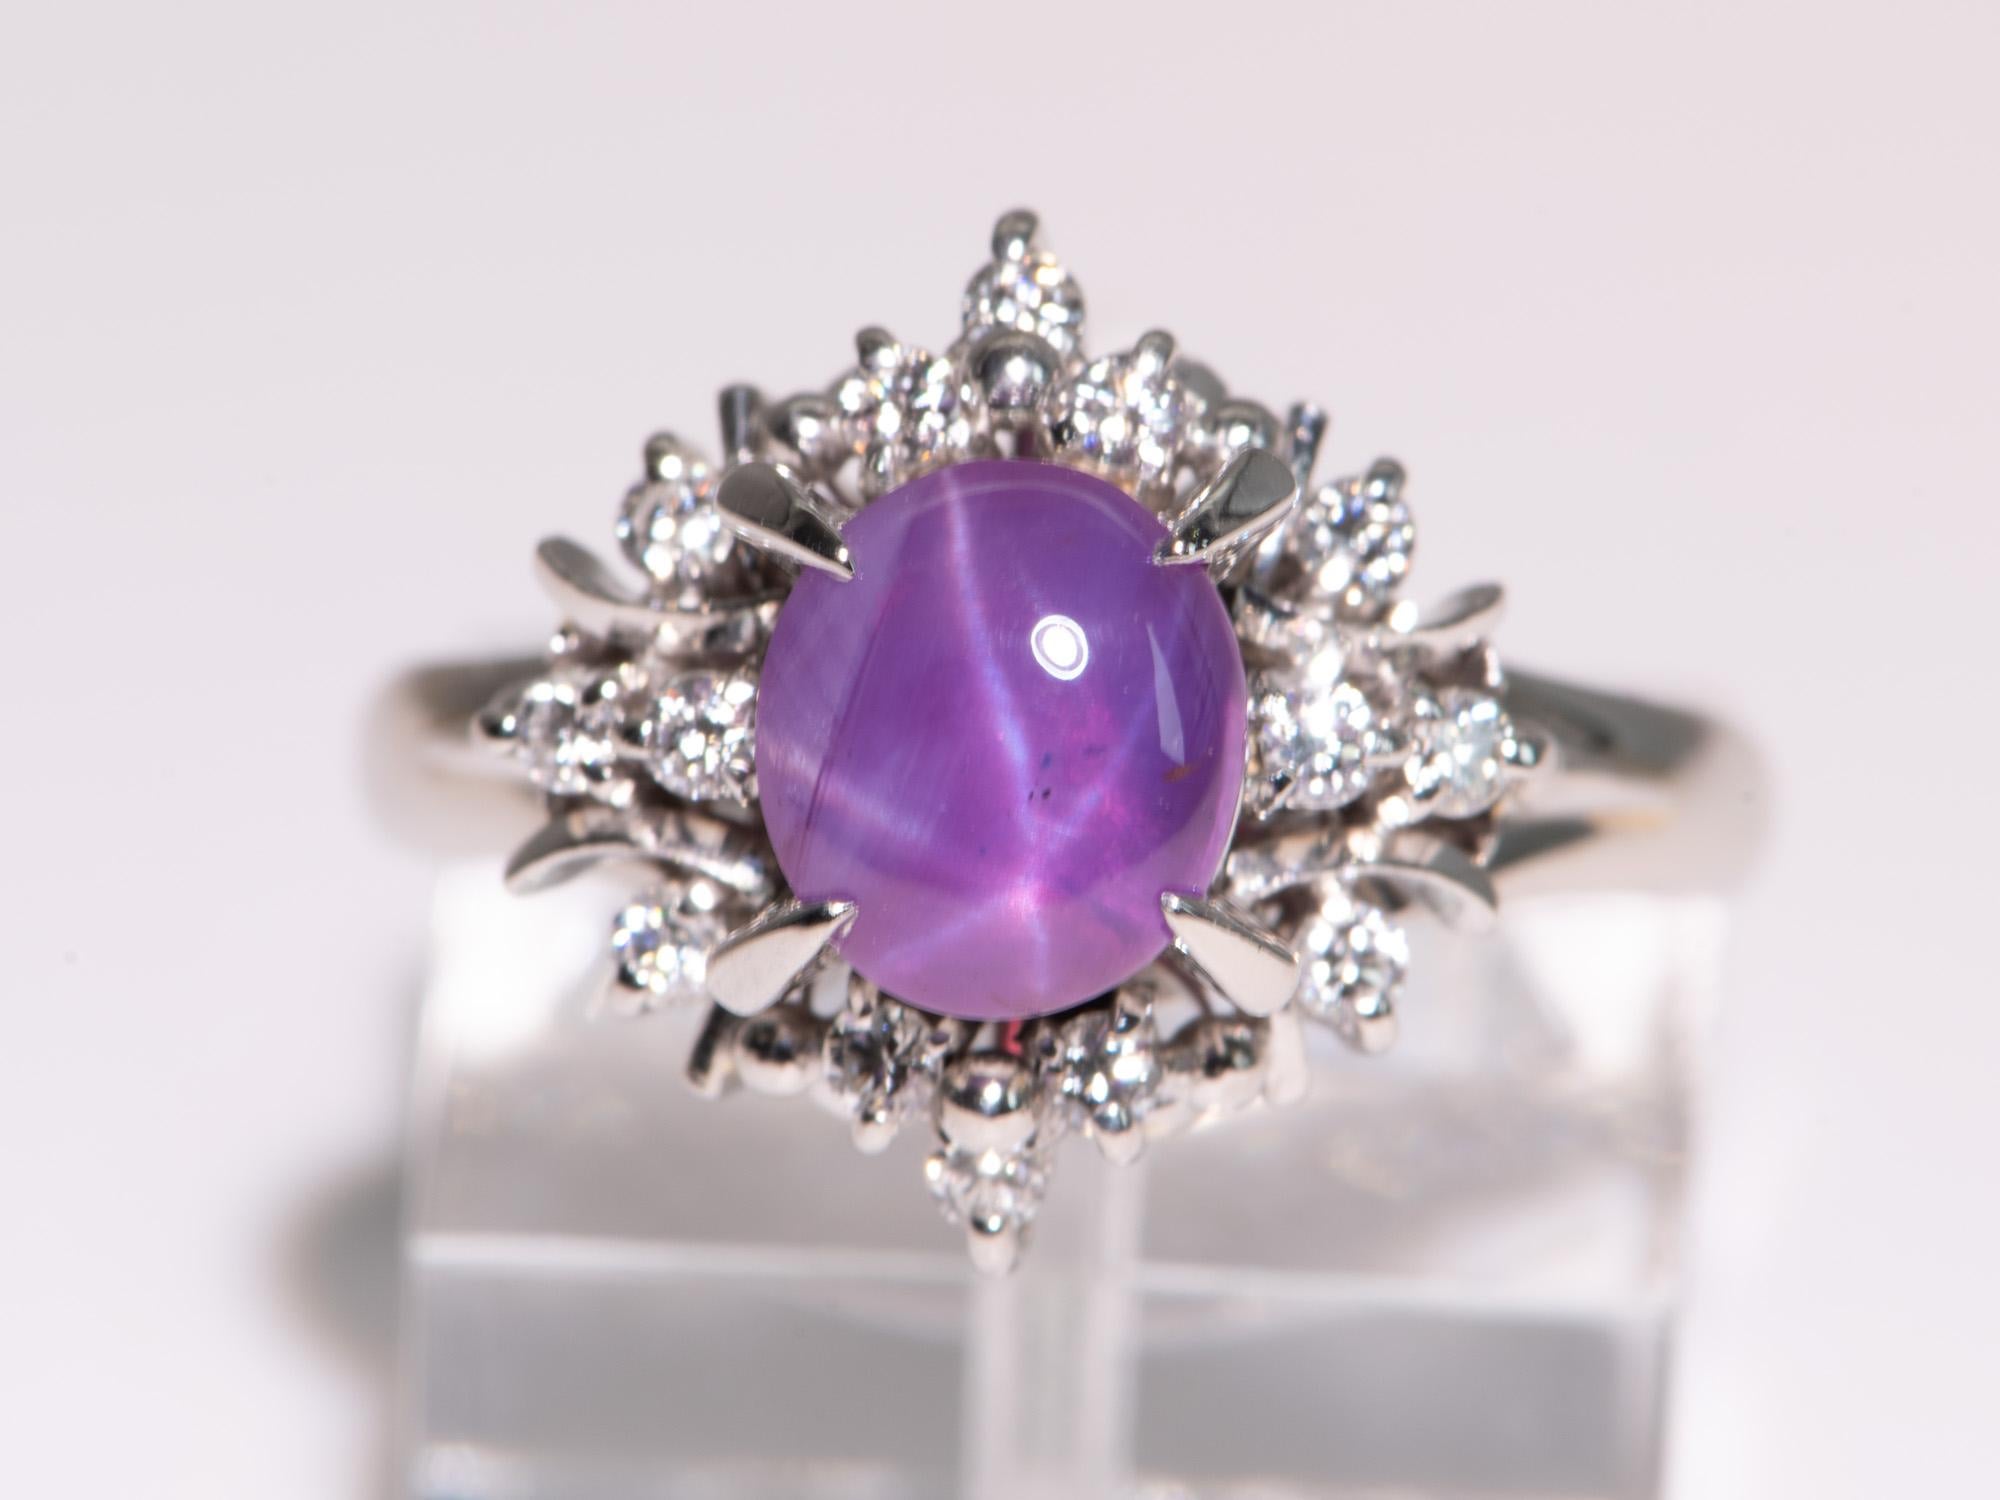 ♥ Purple Star Sapphire with Diamond Halo Ring in Platinum
♥ The face of the ring measures 14mm in width (East West direction), 14mm in length (North South direction), and sits 10.6mm tall from the finger. The band is 2.2mm wide.

♥ US size 7 (Free